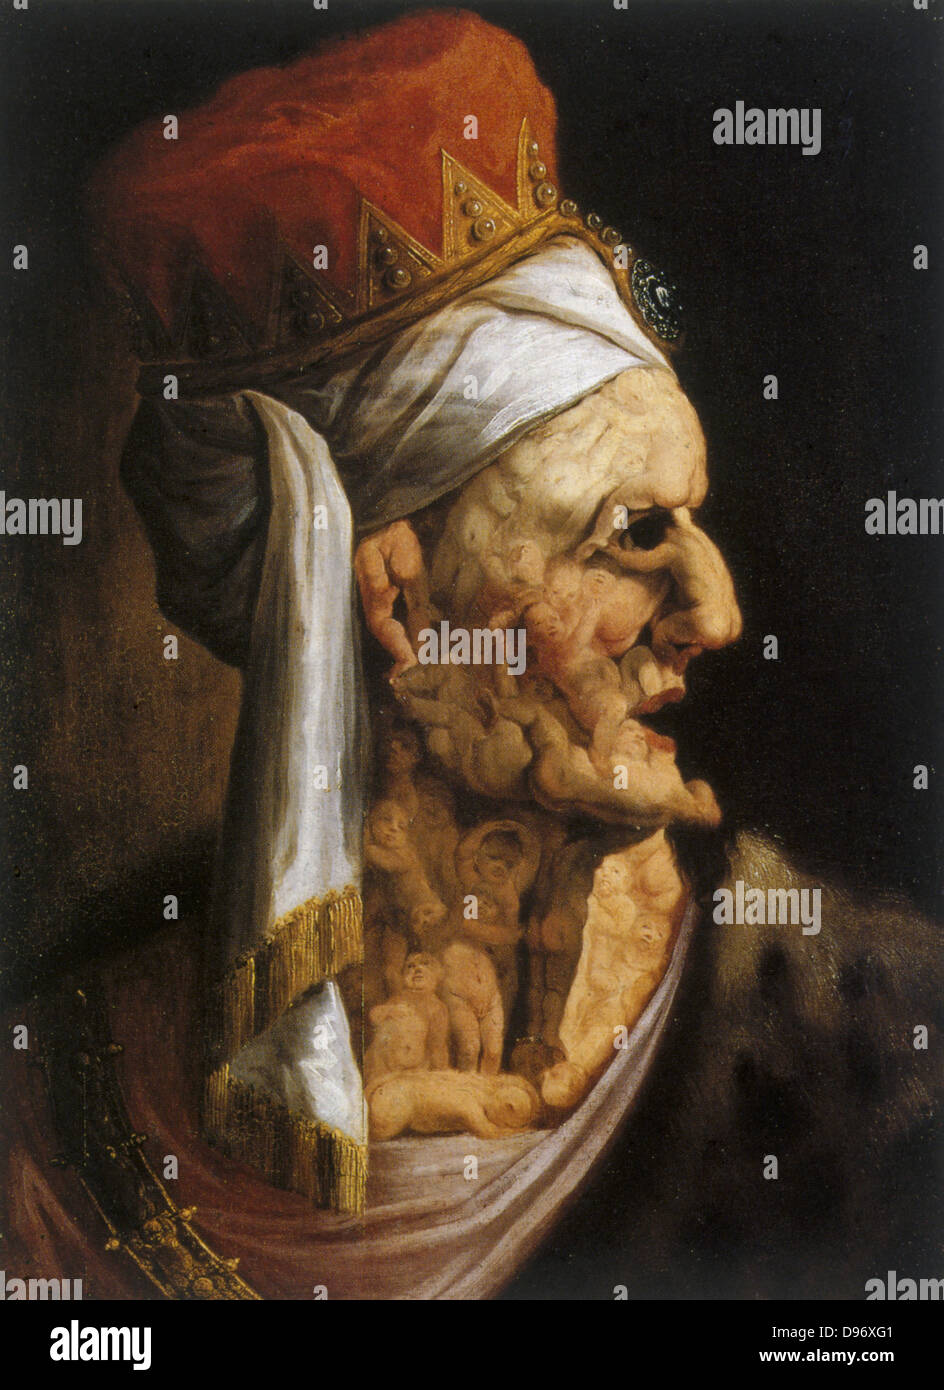 Herod' king of the Jews. Crowned head with face and neck composed of first-born (Holy Innocents) he massacred (Bible Matt. 2:16). Anonymous 17th century in style of Arcimboldo. Oil on wood. Stock Photo